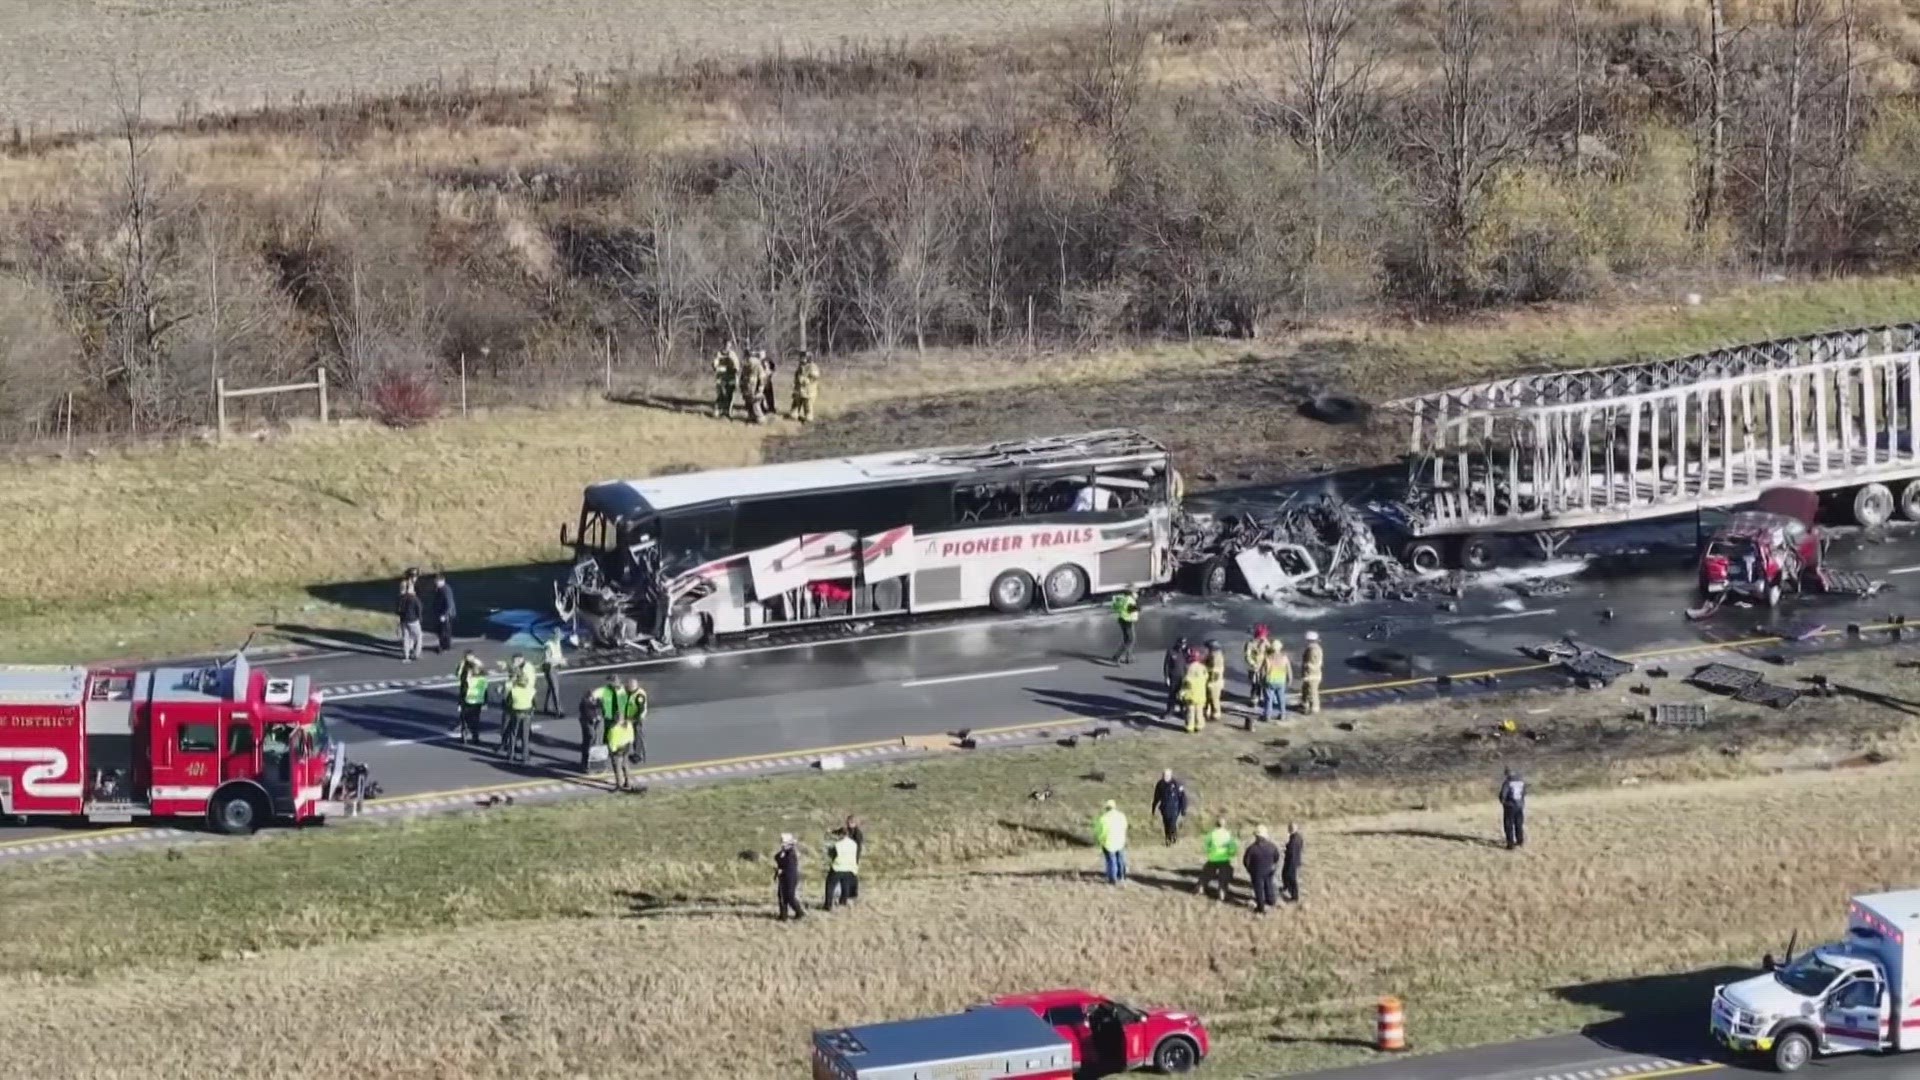 Six people died and 18 others were injured when a semi smashed into an SUV and a charter bus on Interstate 70 in Licking County.